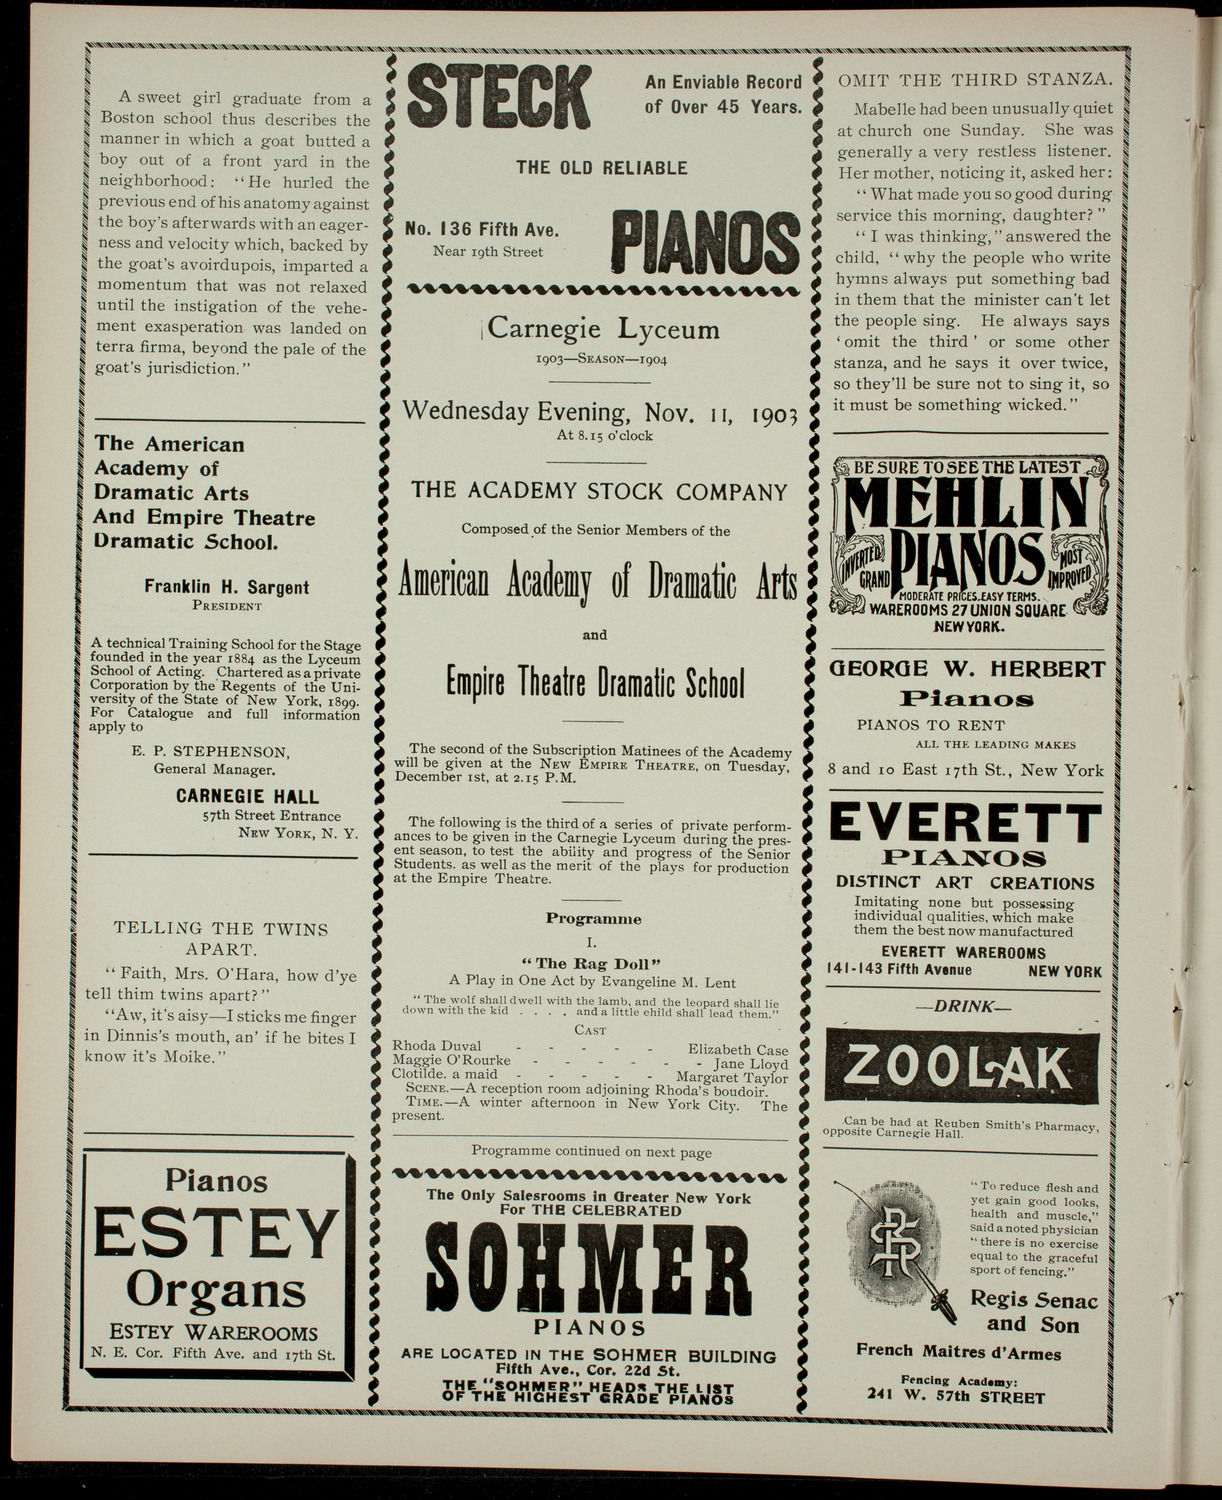 Academy Stock Company of the American Academy of Dramatic Arts/Empire Theatre Dramatic School, November 11, 1903, program page 2